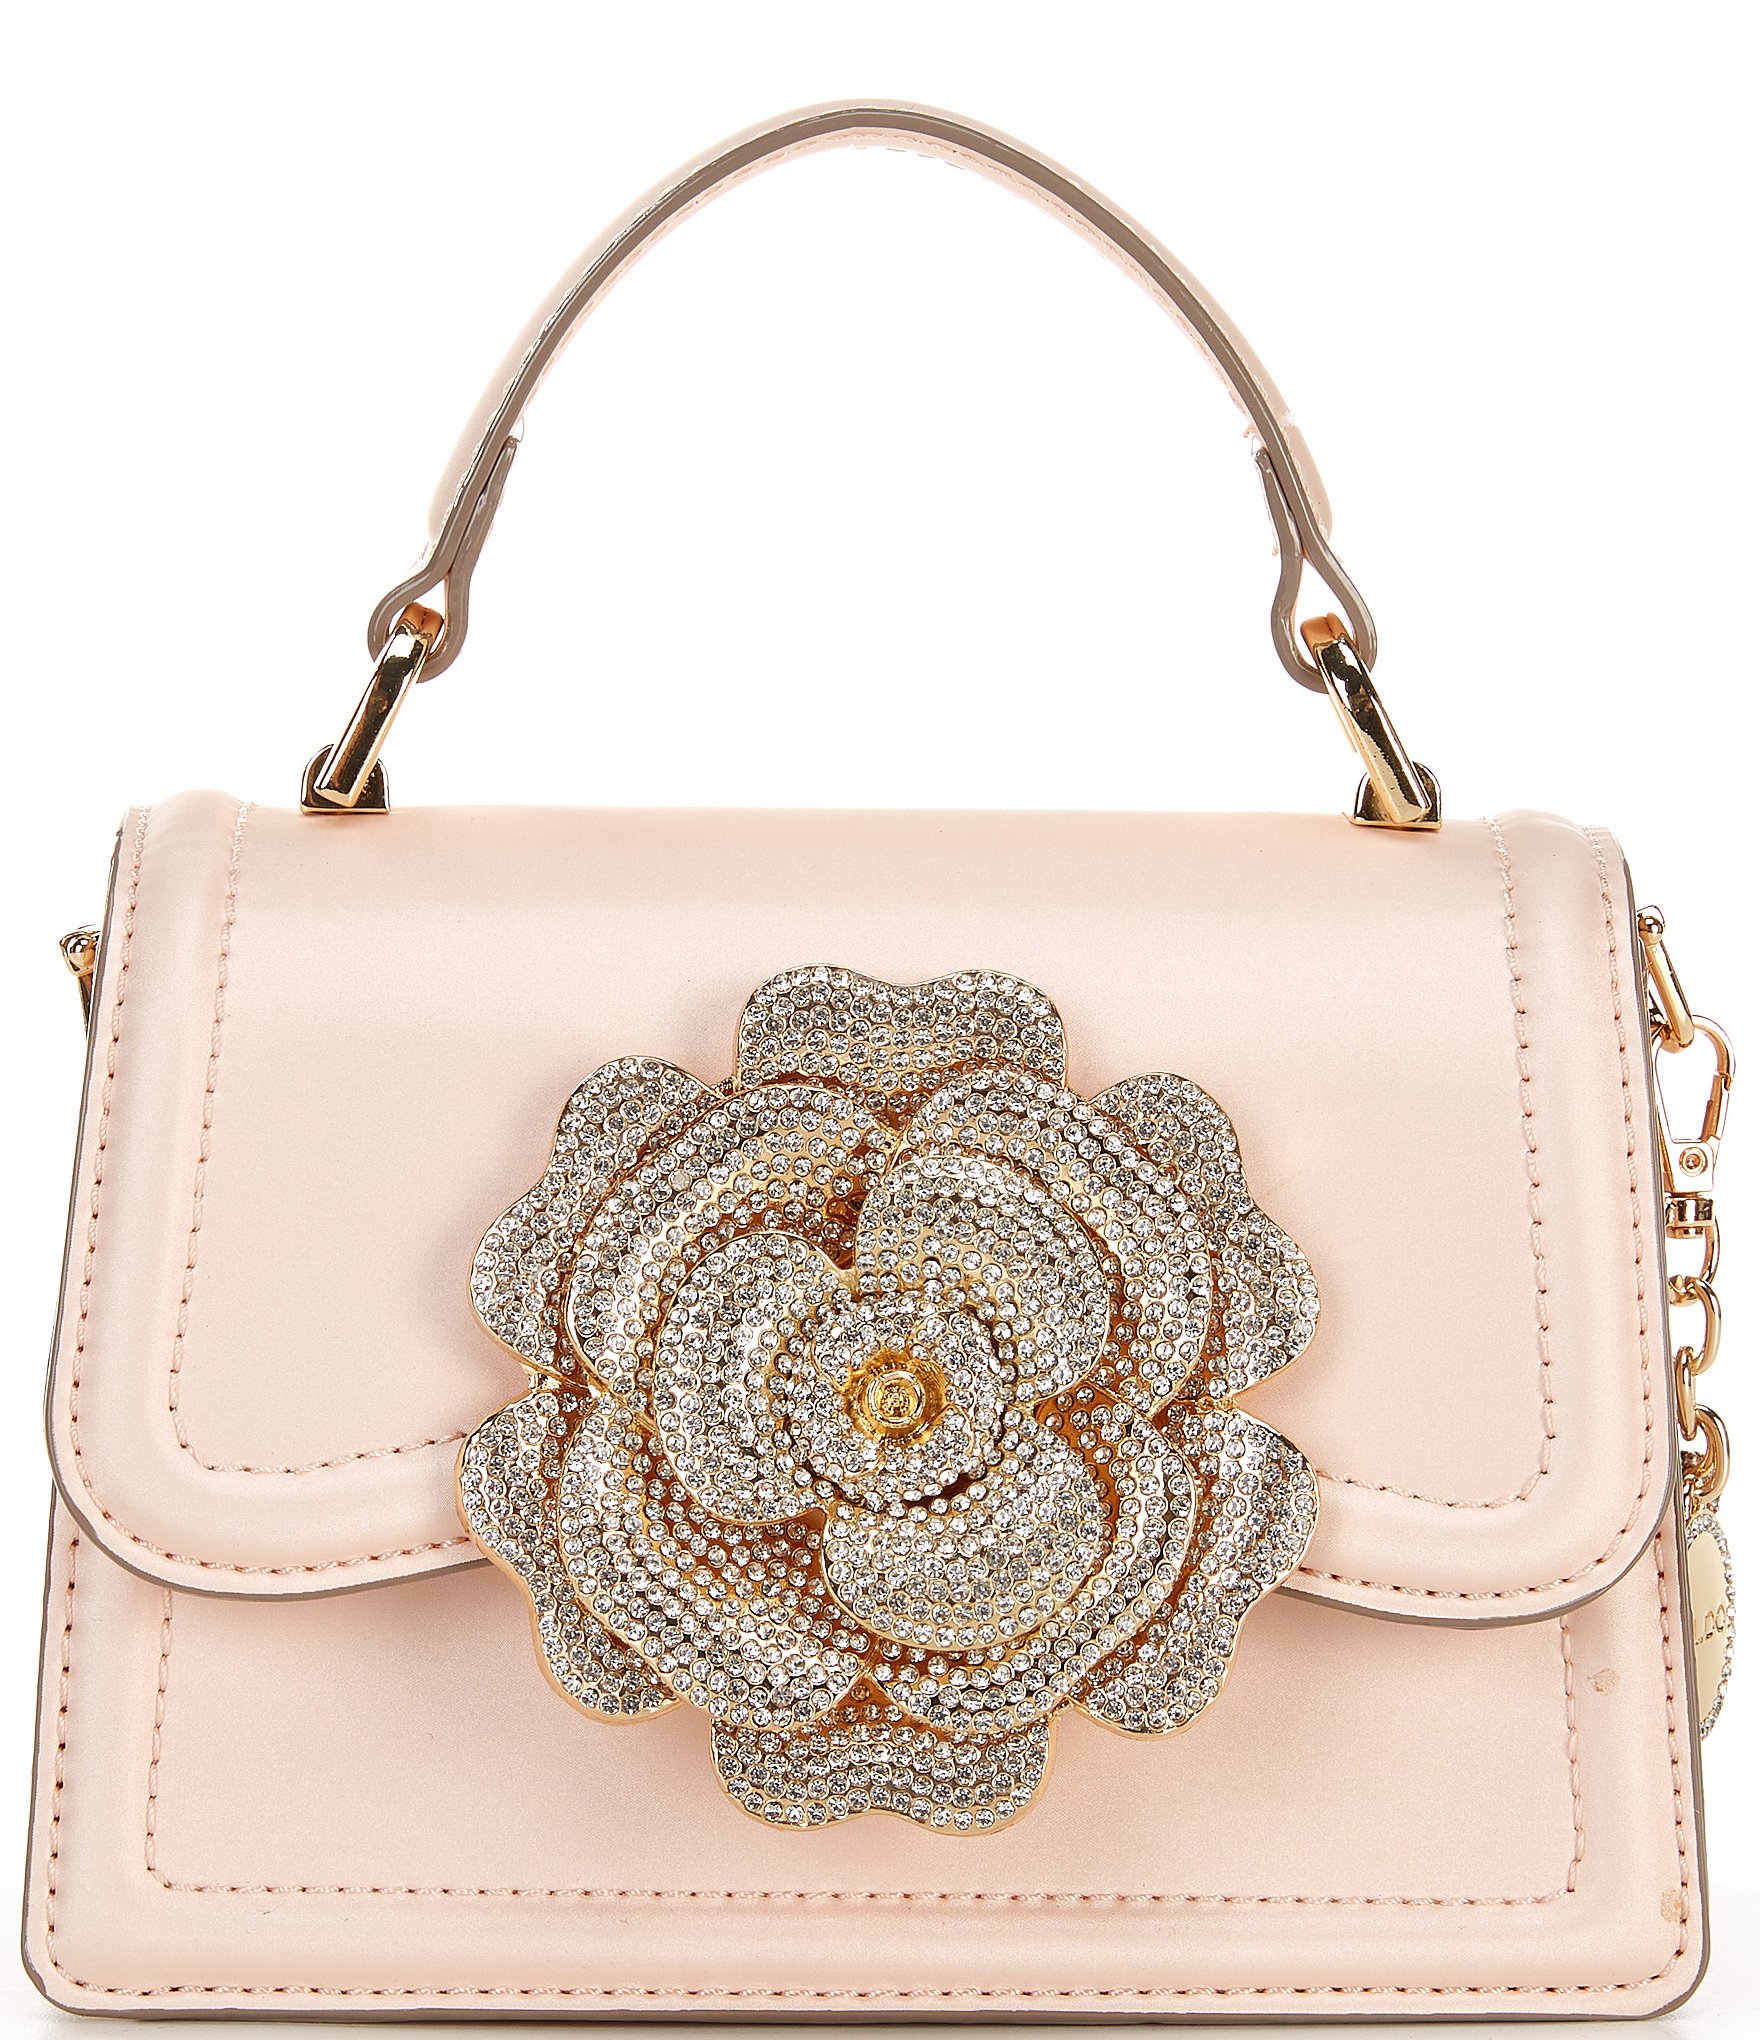 Aldo bags latest collection, new Aldo bags collection